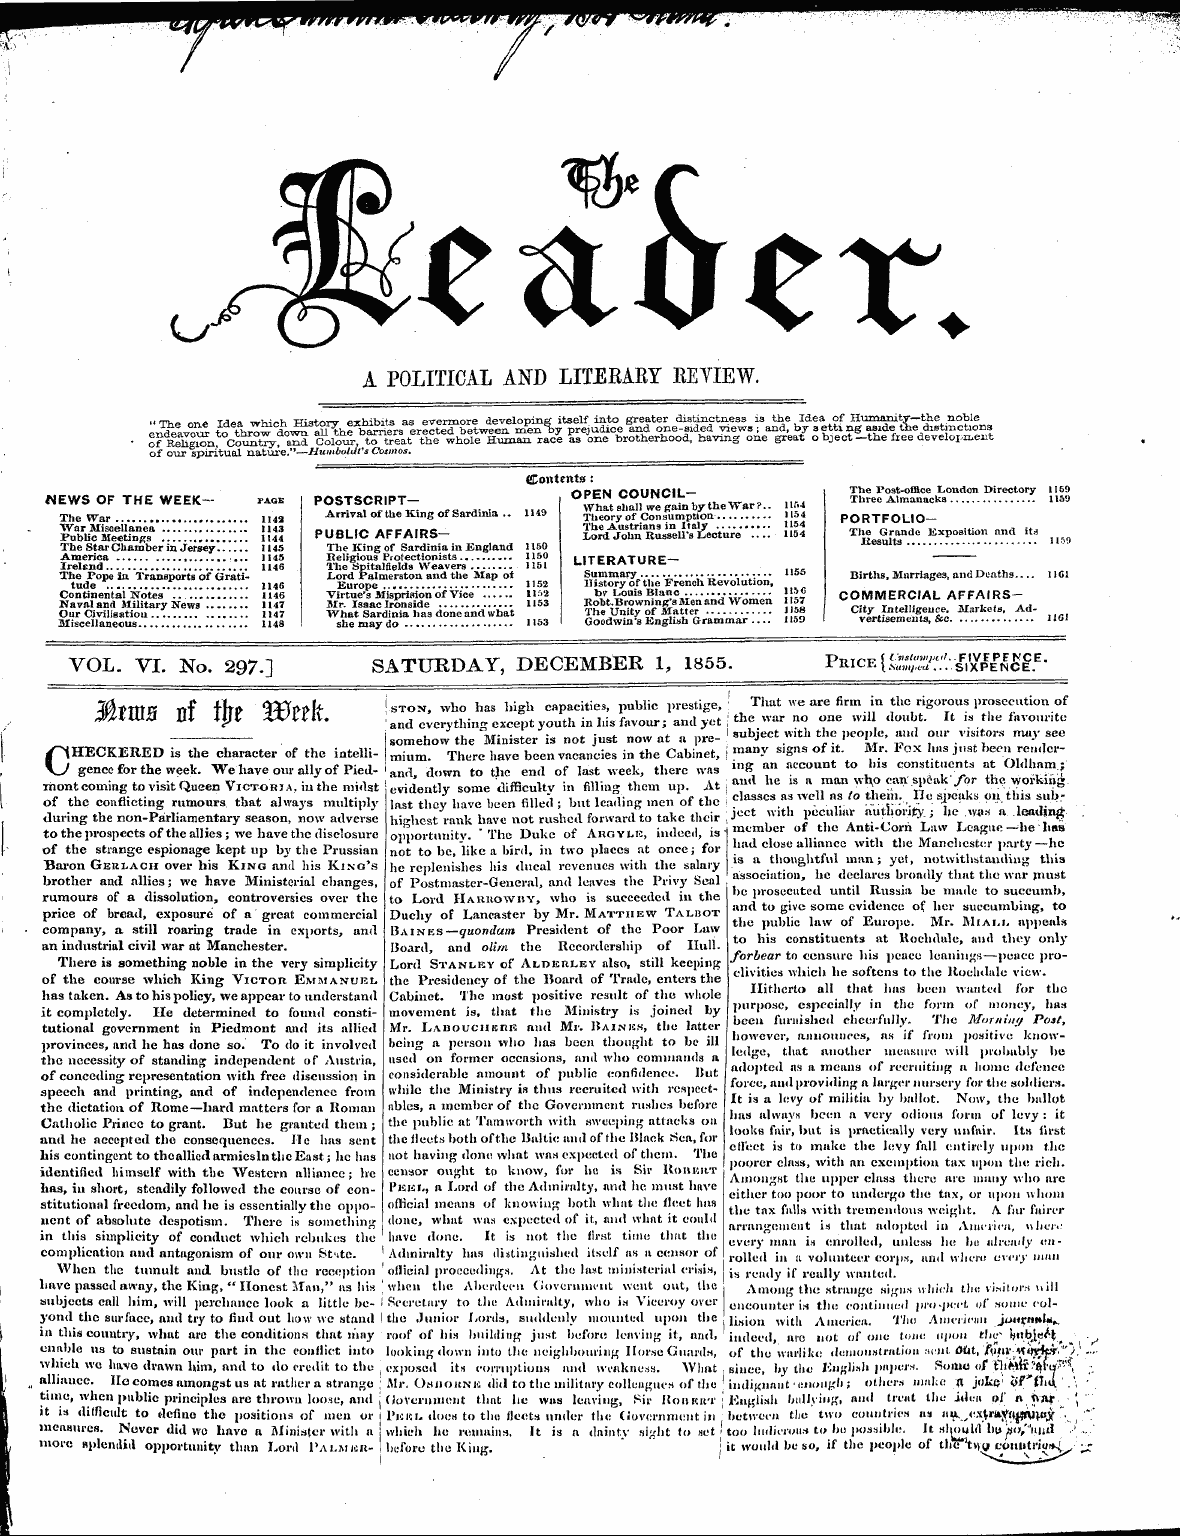 Leader (1850-1860): jS F Y, 1st edition - A Political And Literaky Eetiew.